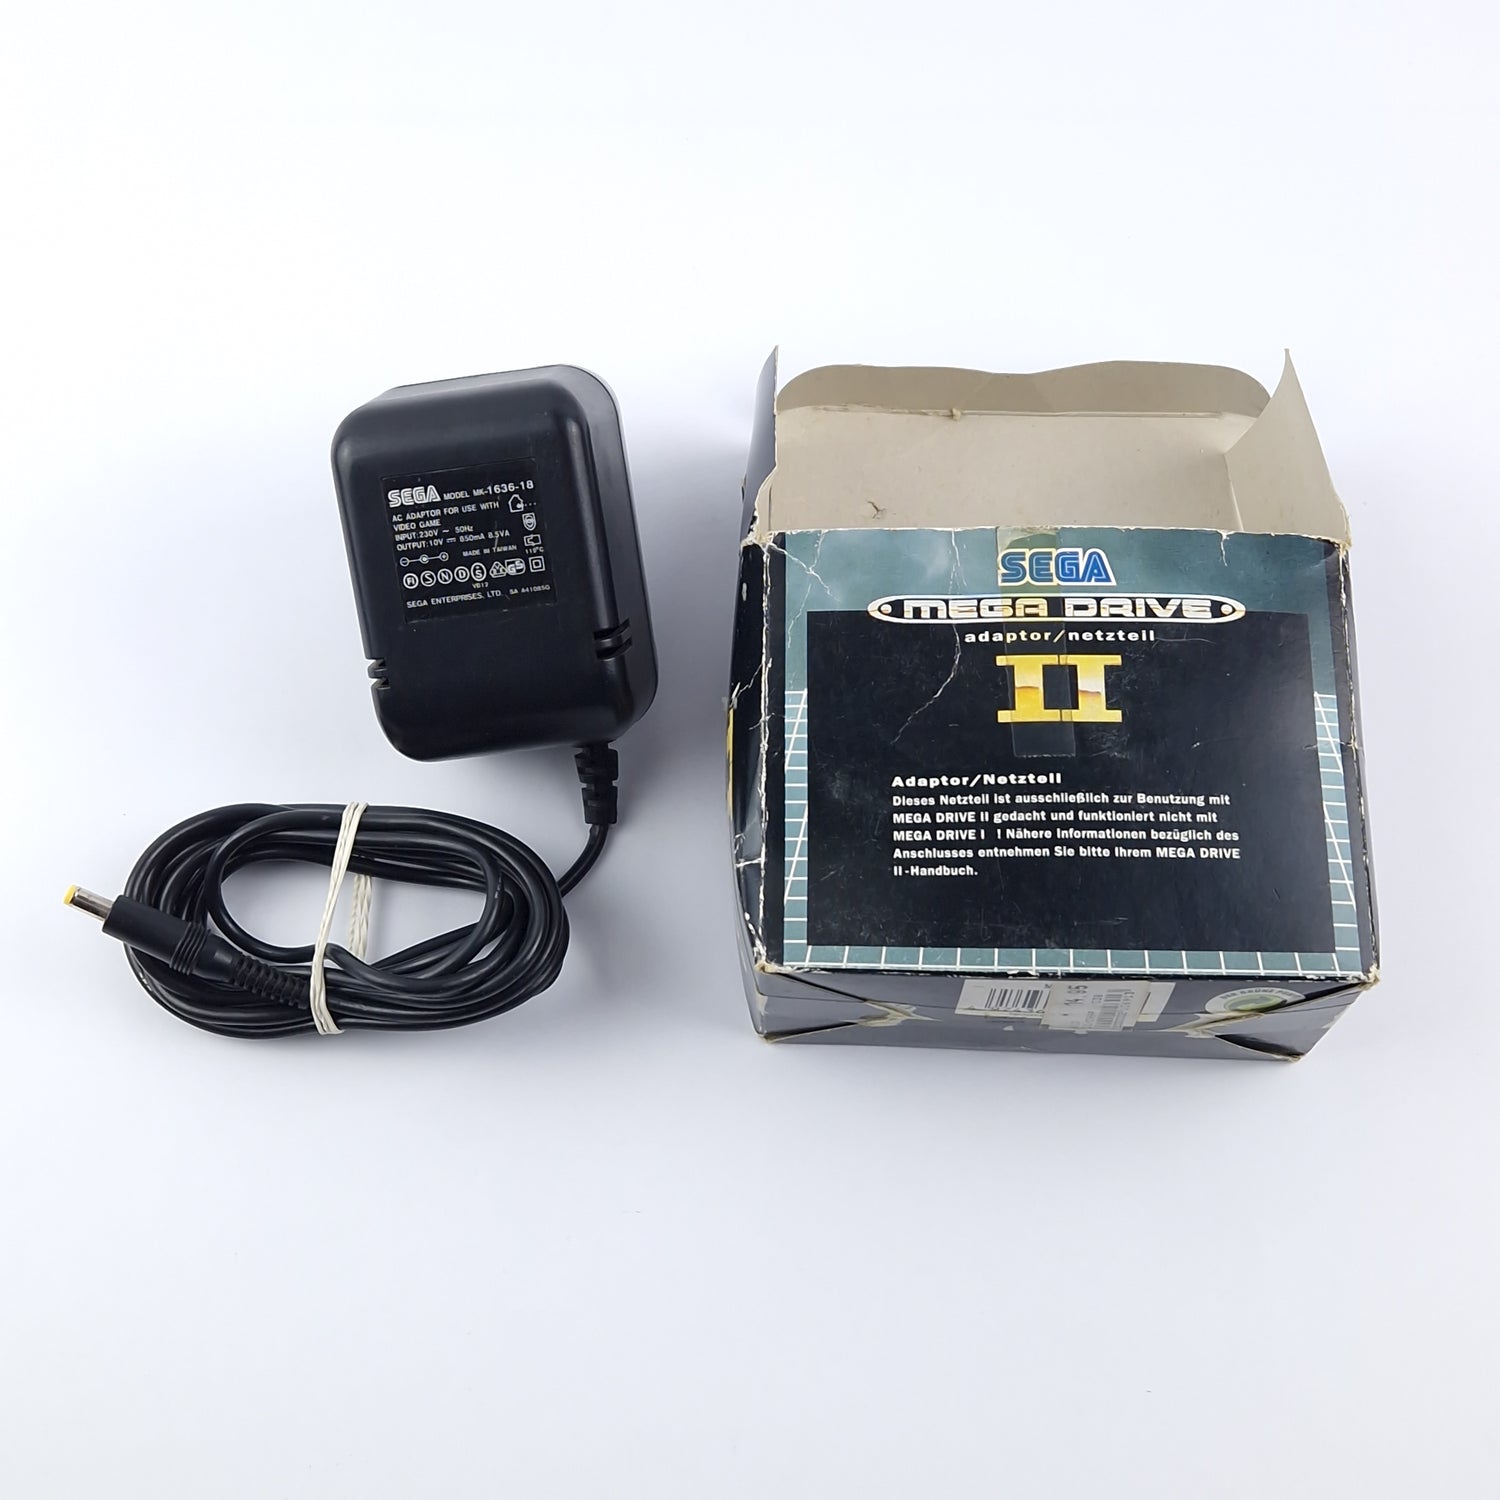 Sega Mega Drive II 2 Accessories Item: Adapter / Power Supply - Cable Cable OVP PAL